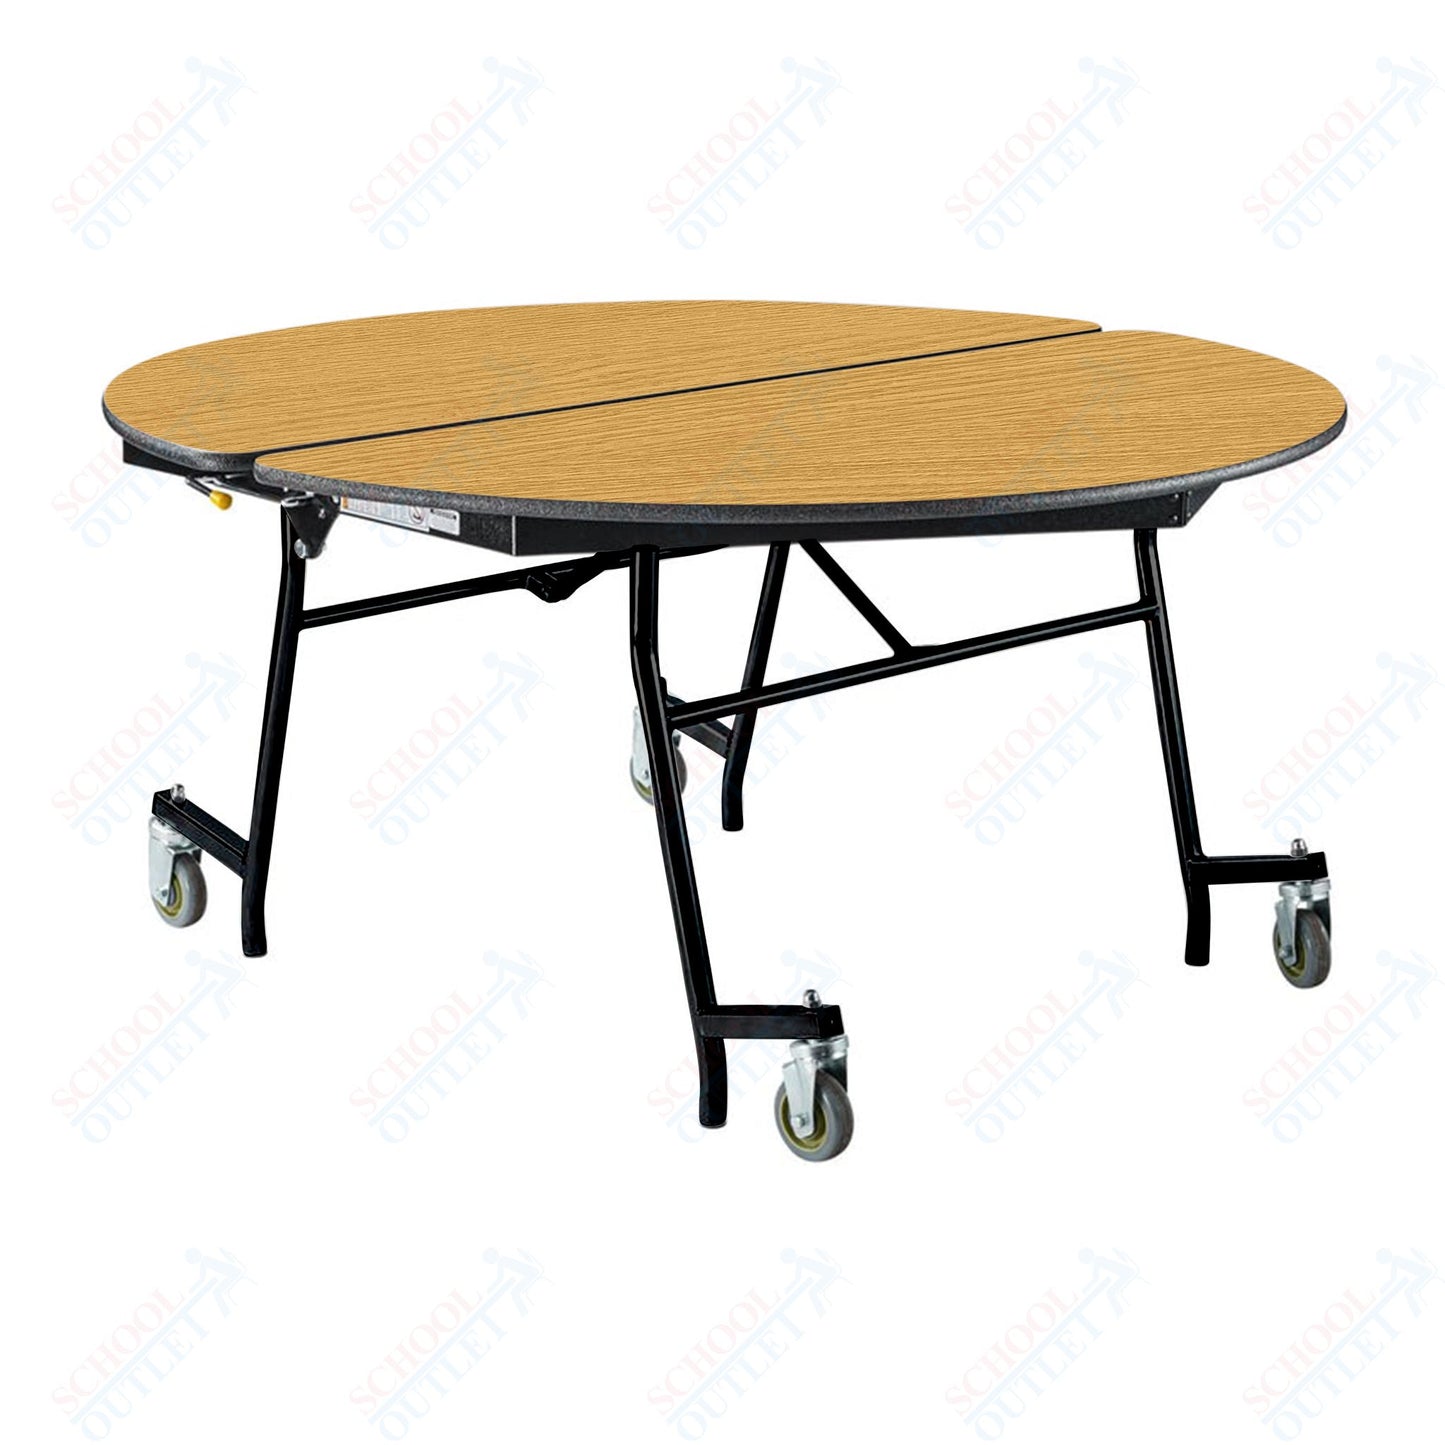 NPS Mobile Cafeteria Round Table Shape Unit - 60" W x 60" L (National Public Seating NPS-MT60R)